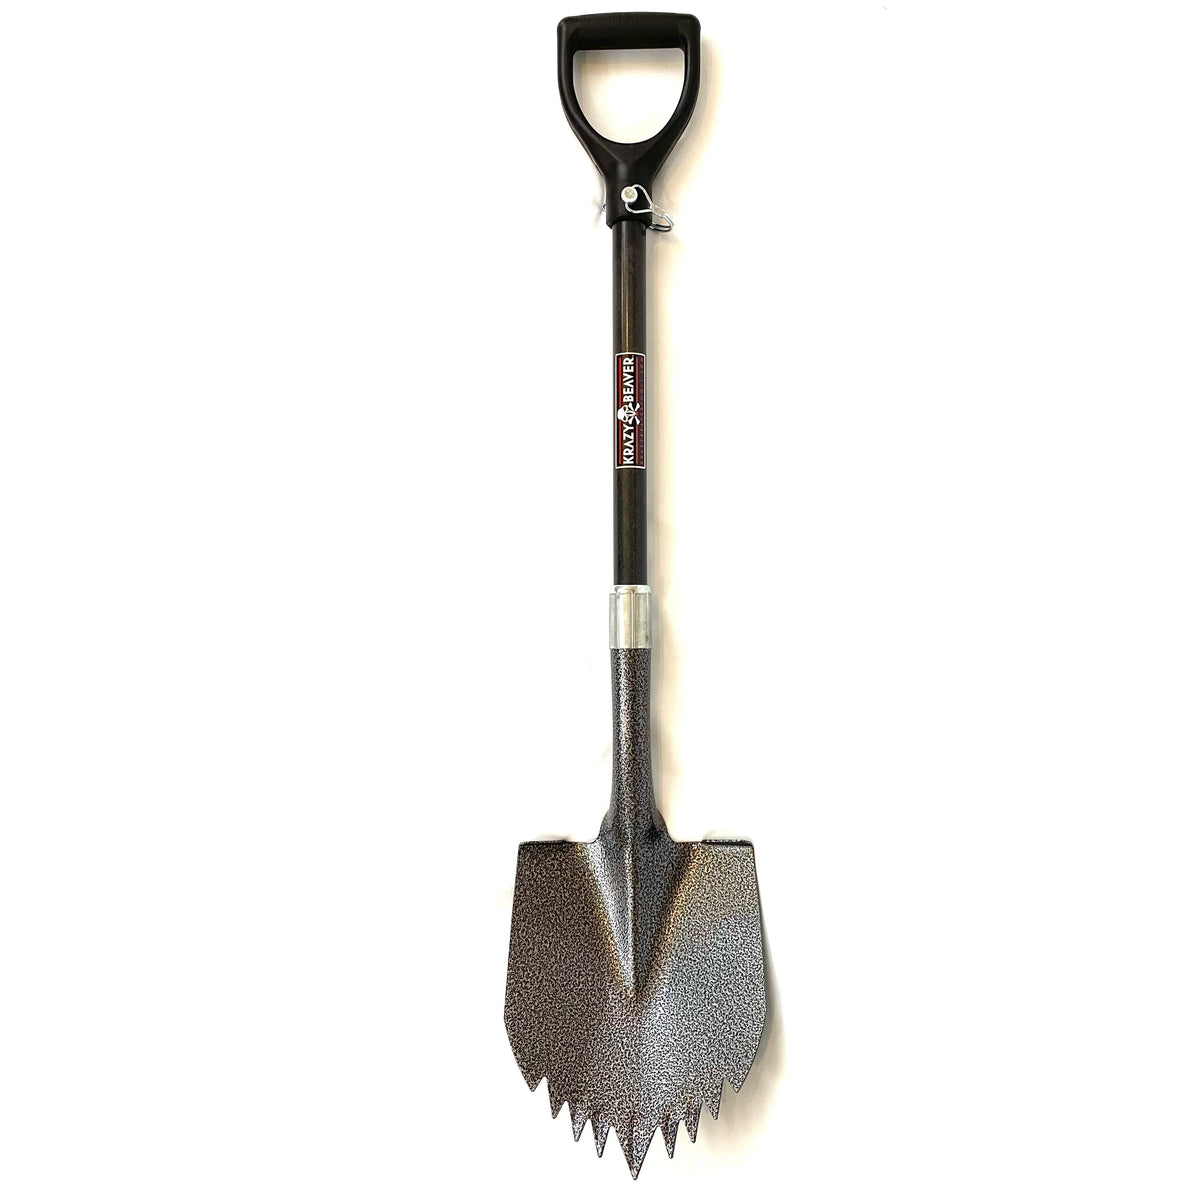 Krazy Beaver Shovel (Silver Vein Head / Black Handle 45638)  Recovery Gear, Camping gear, Shovel, Camping Krazy Beaver Tools- Overland Kitted